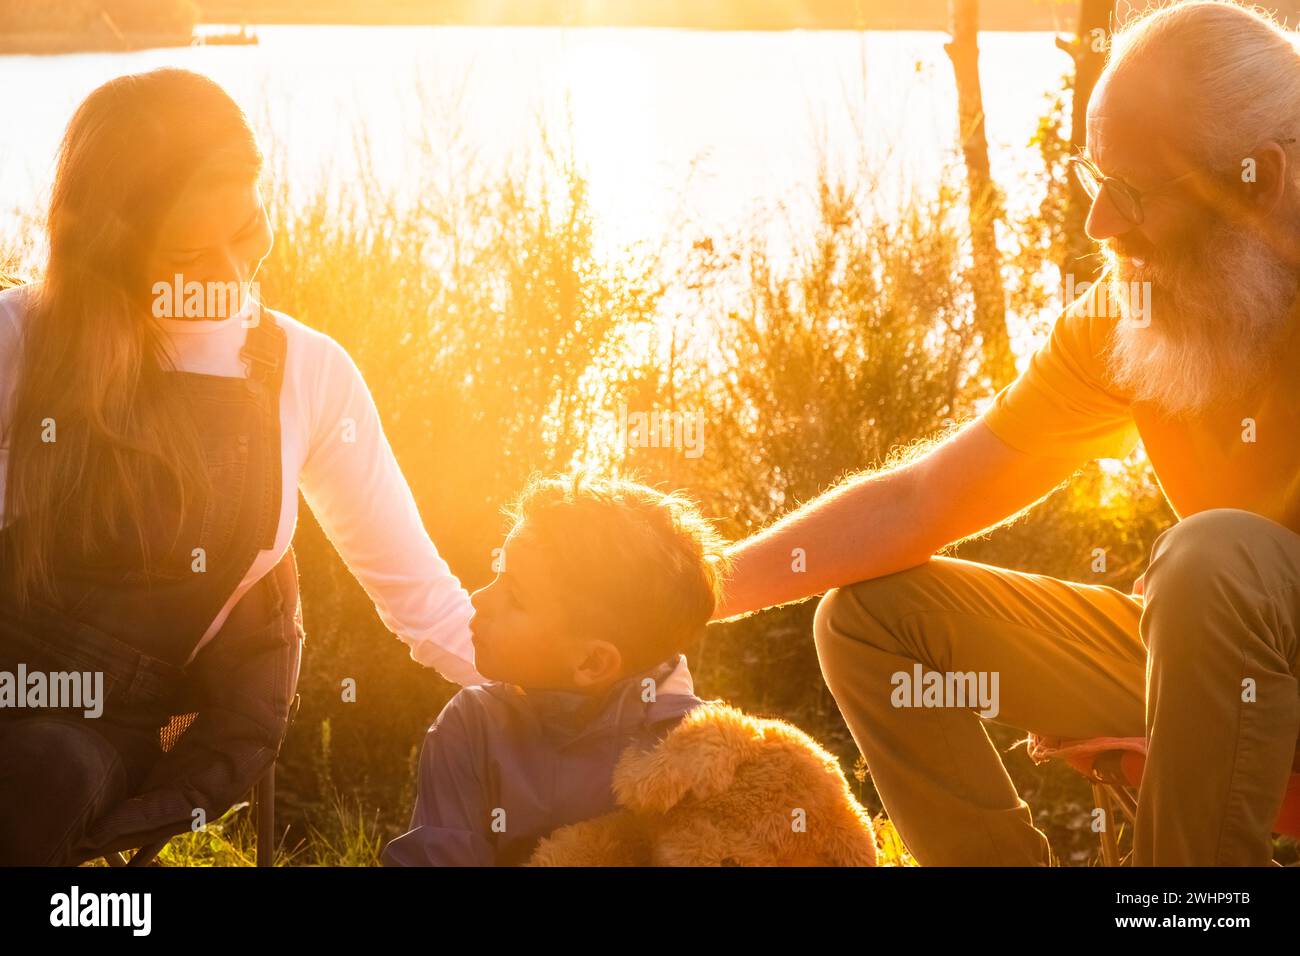 Familiencamping am Forest Lake bei Sonnenuntergang Stockfoto